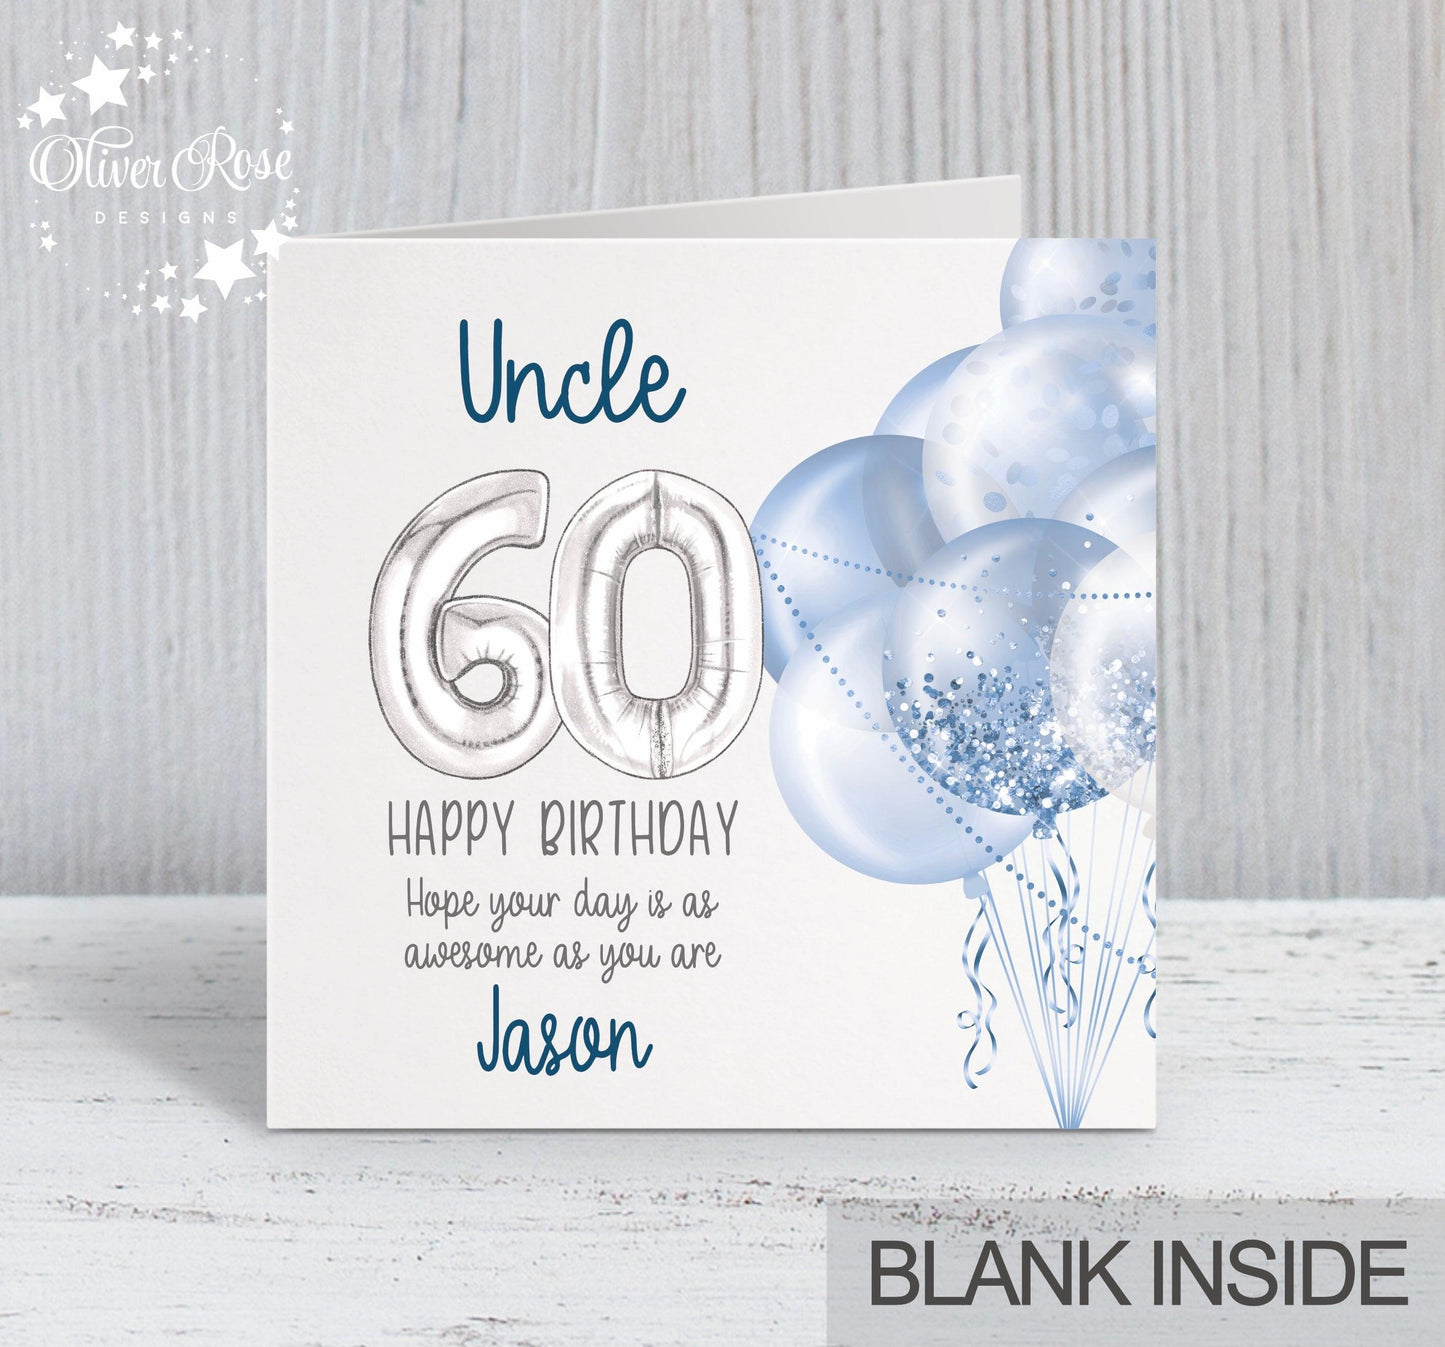 60th Birthday Card Uncle, Blue & Silver Balloons, Personalised with name, Happy Birthday, Hope your day is as awesome as you are! 5.75" square Blank Inside